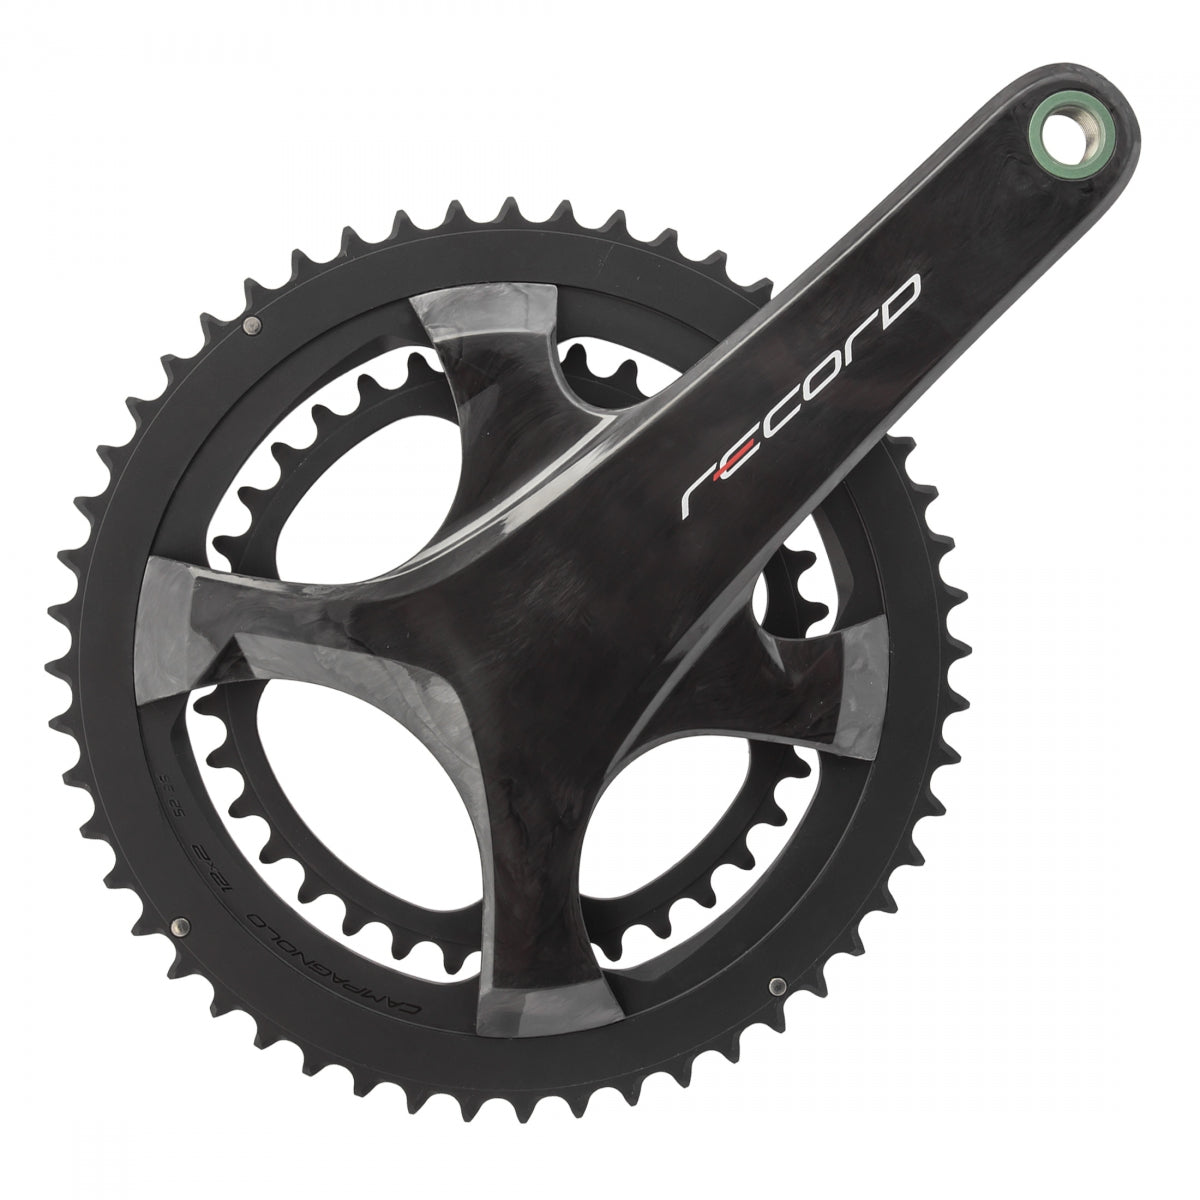 Campagnolo Record Crankset - 172.5mm, 12-Speed, 52/36t, 112/146 Asymmetric  BCD, Campagnolo Ultra-Torque Spindle Interface, Carbon